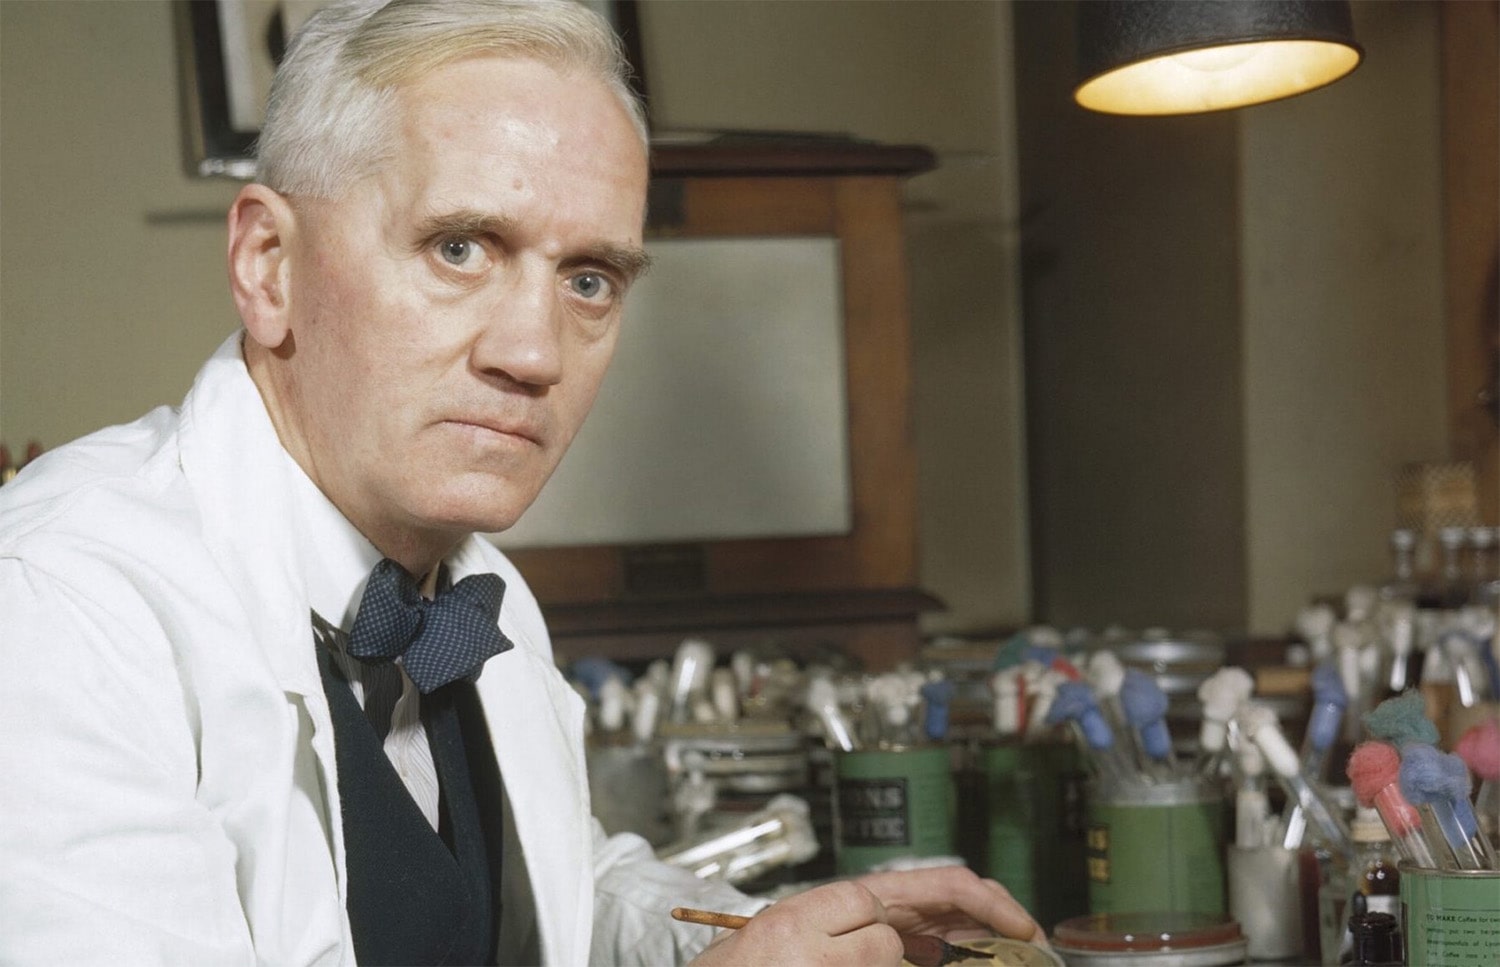 34 interesting facts about Alexander Fleming